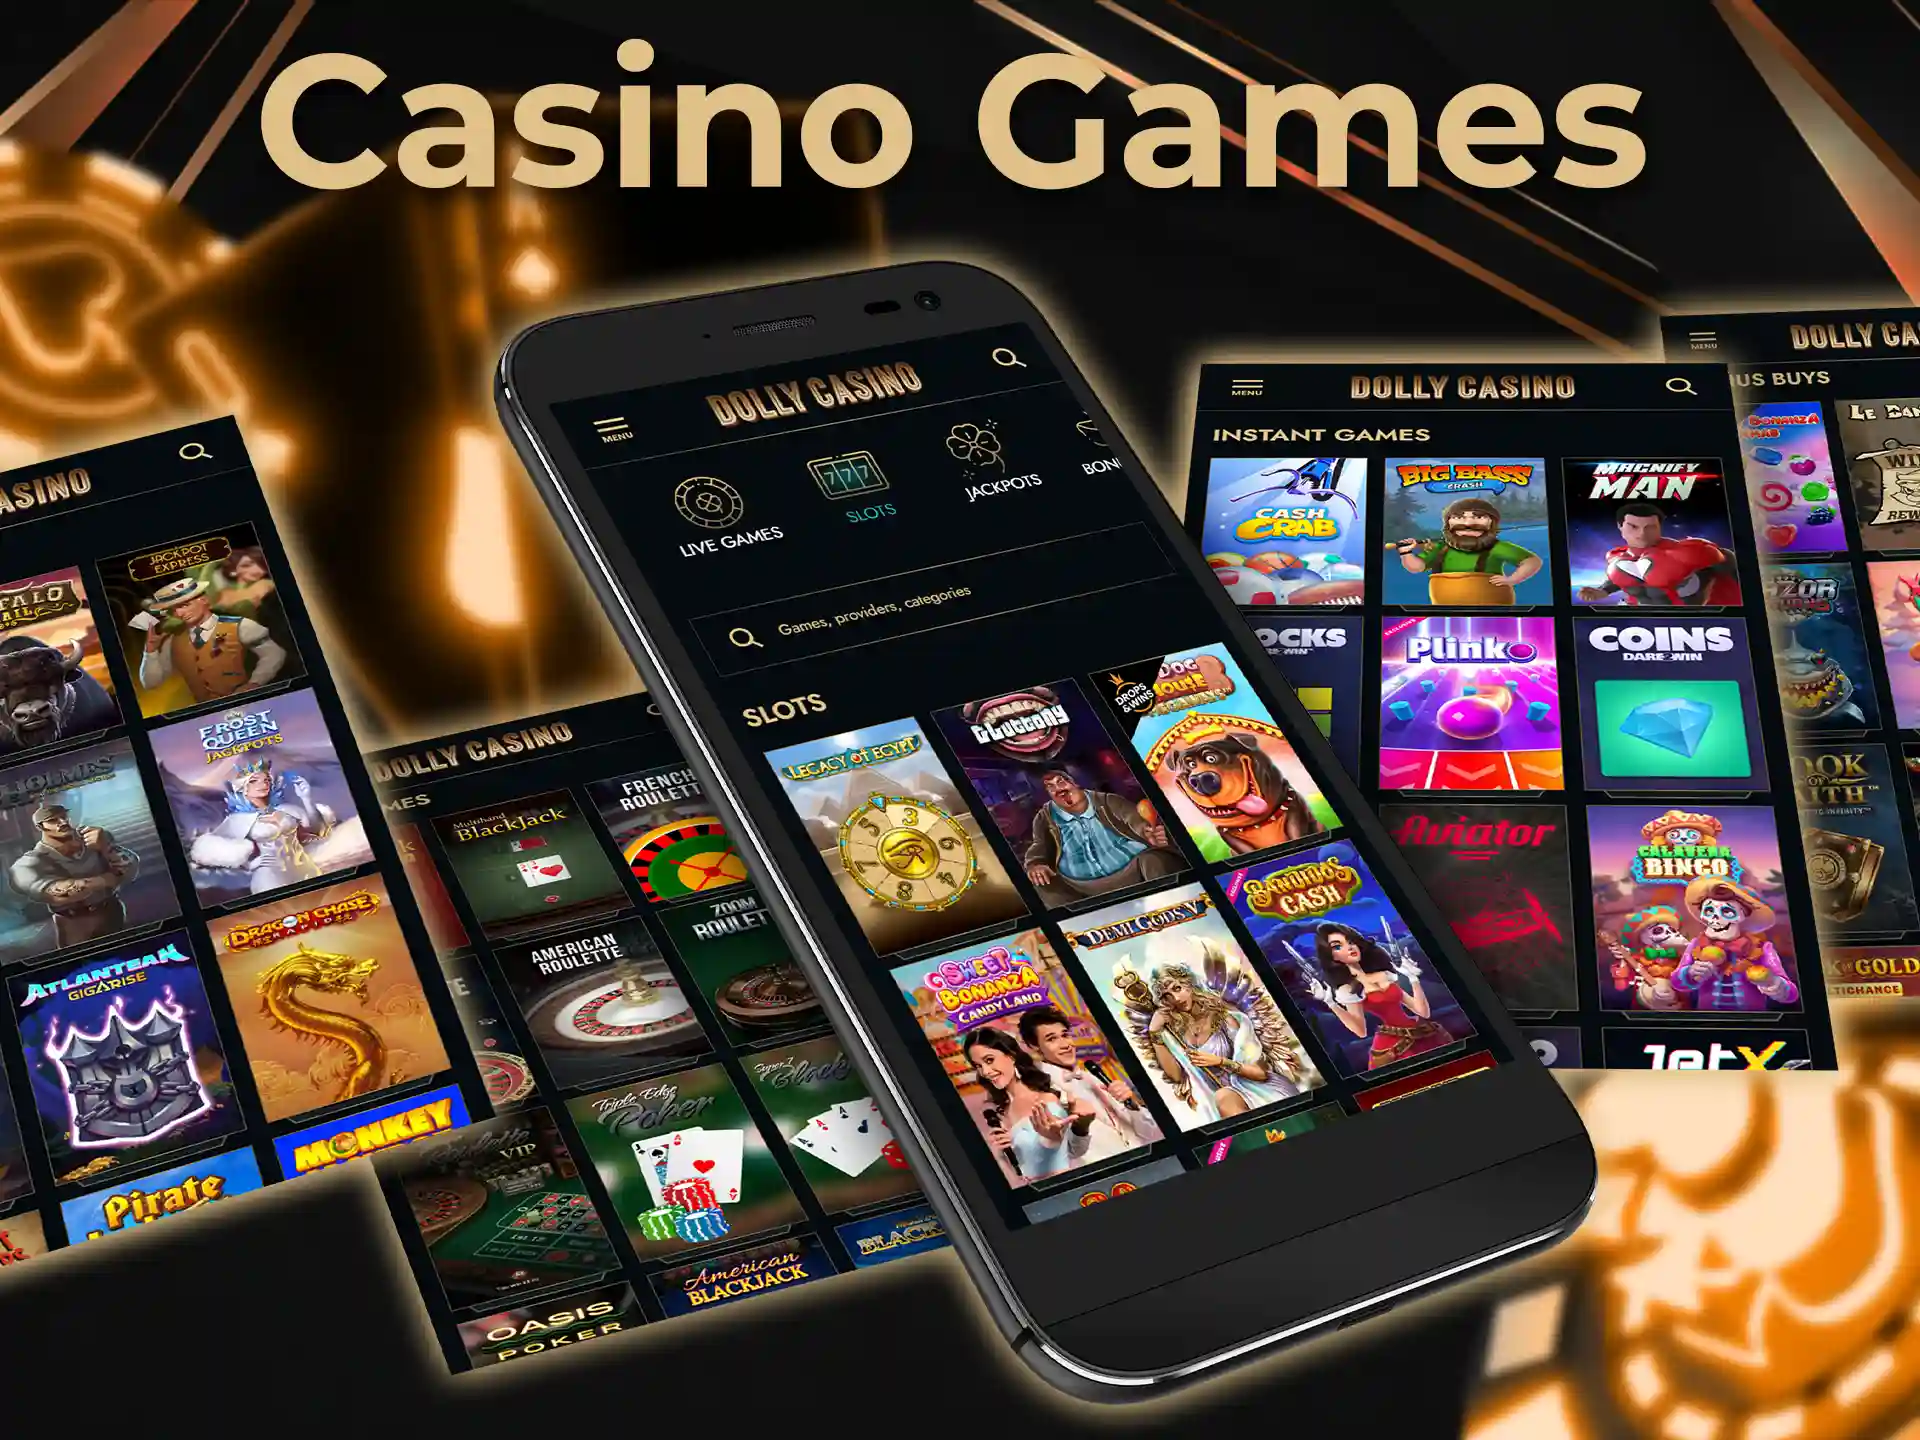 All games in Dolly App are presented in high quality and from the best providers.